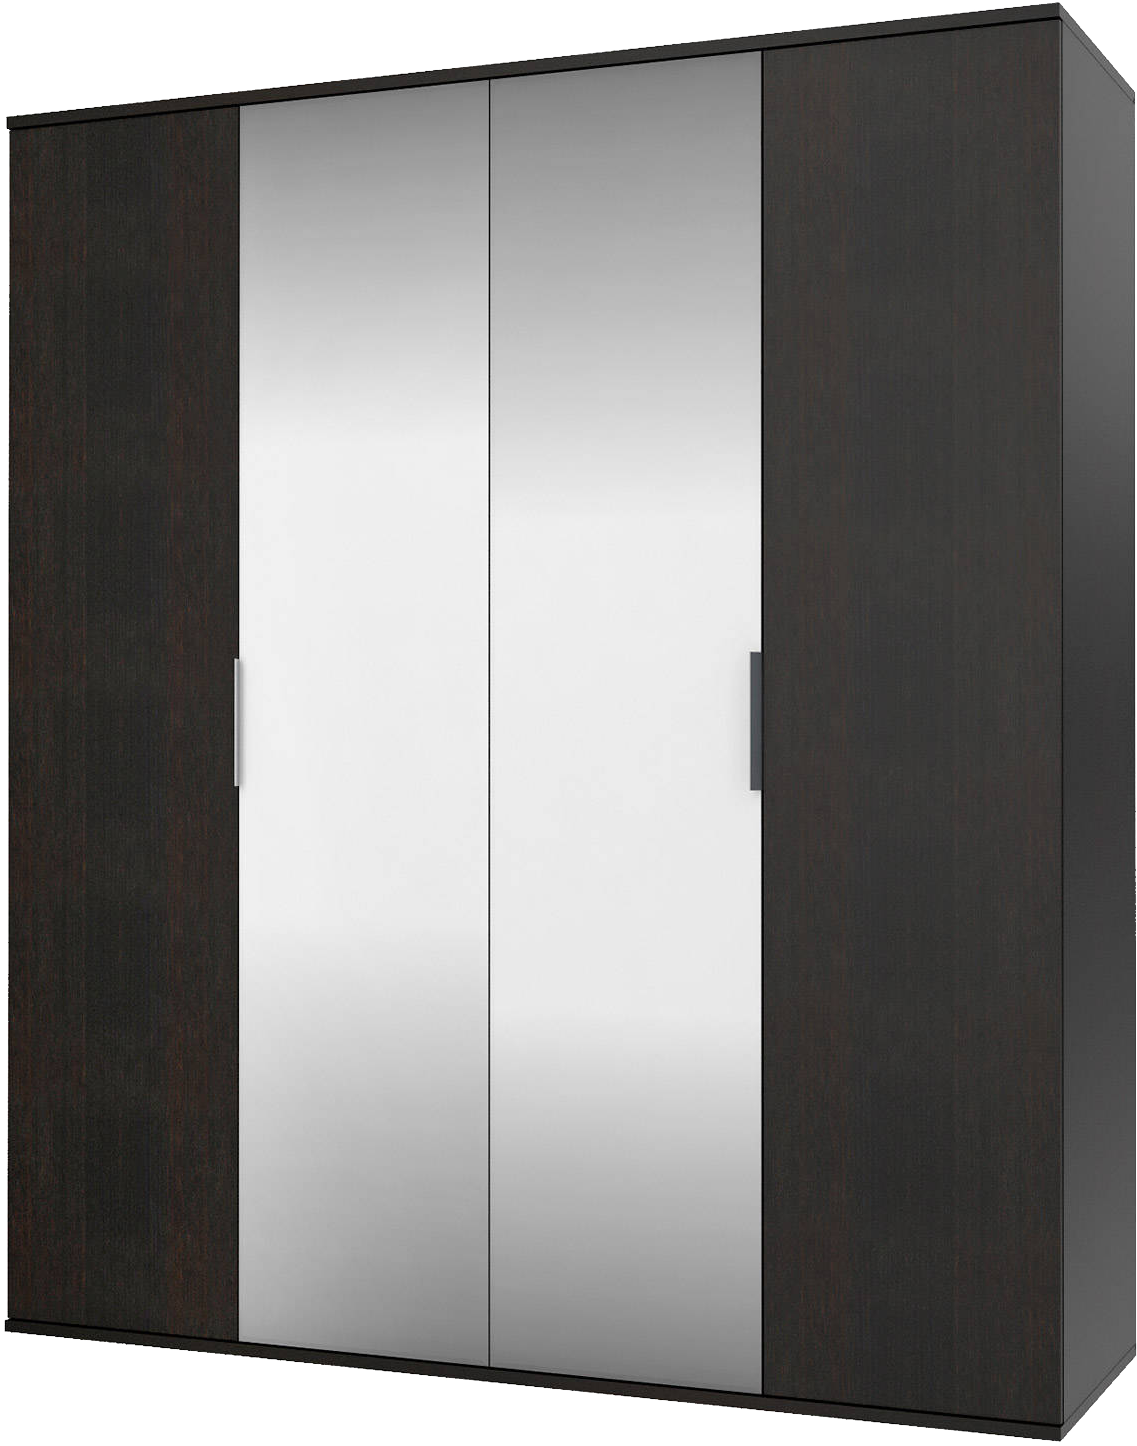 Cupboard PNG Image